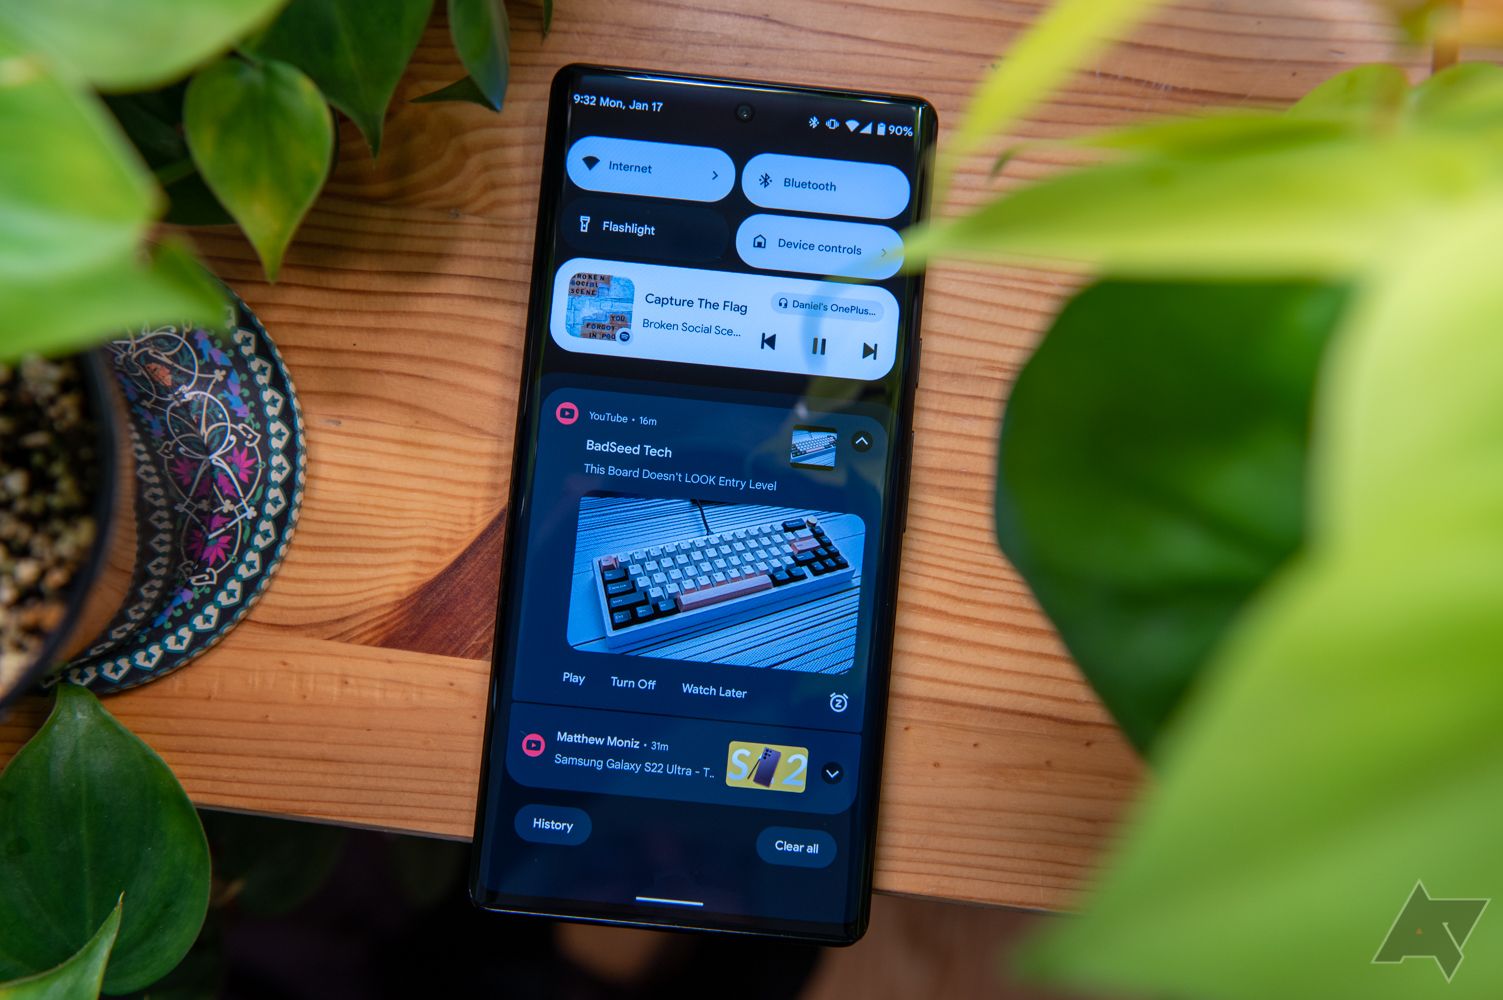 Android 15 may finally allow you to force dark mode in any app